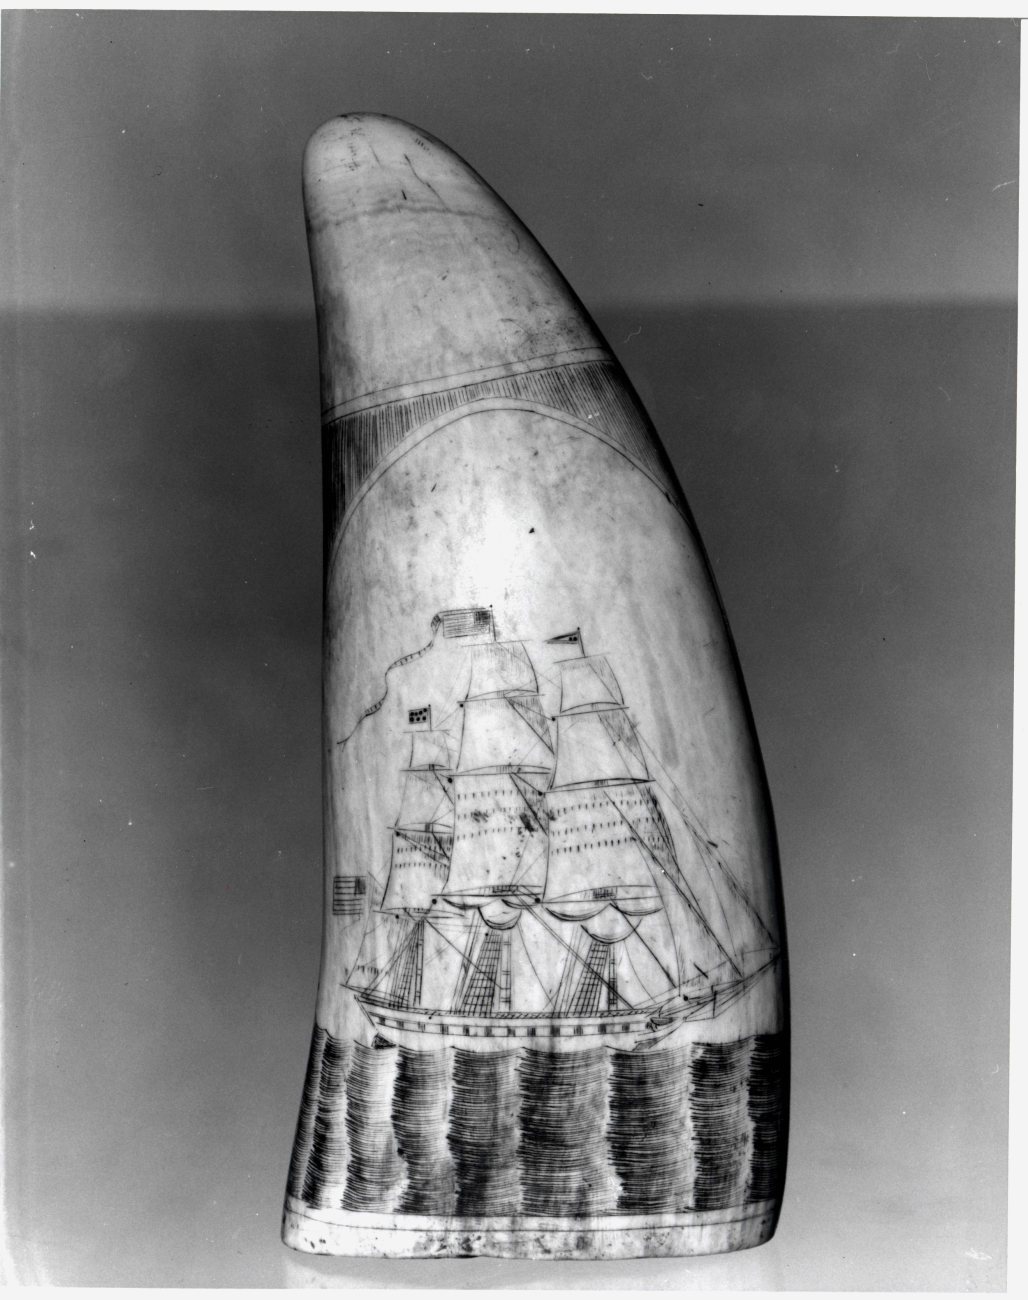 Example of scrimshaw on sperm whale's tooth